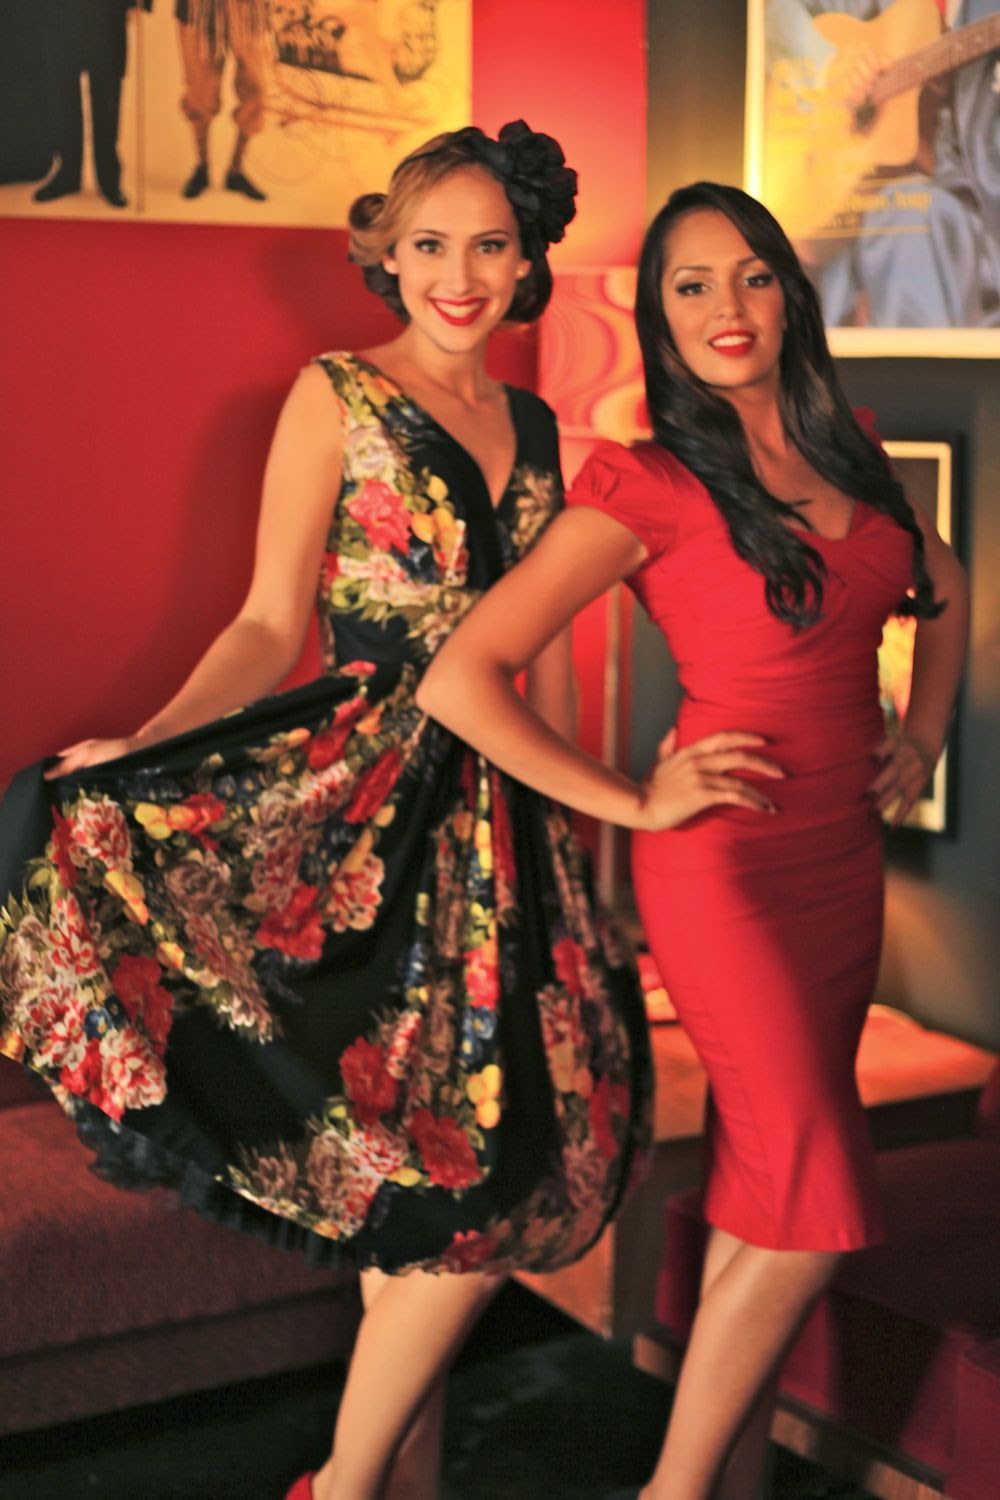 Pinup Empire Clothing | 6/21 Resolution Dr, Caringbah NSW 2229, Australia | Phone: 0428 948 884